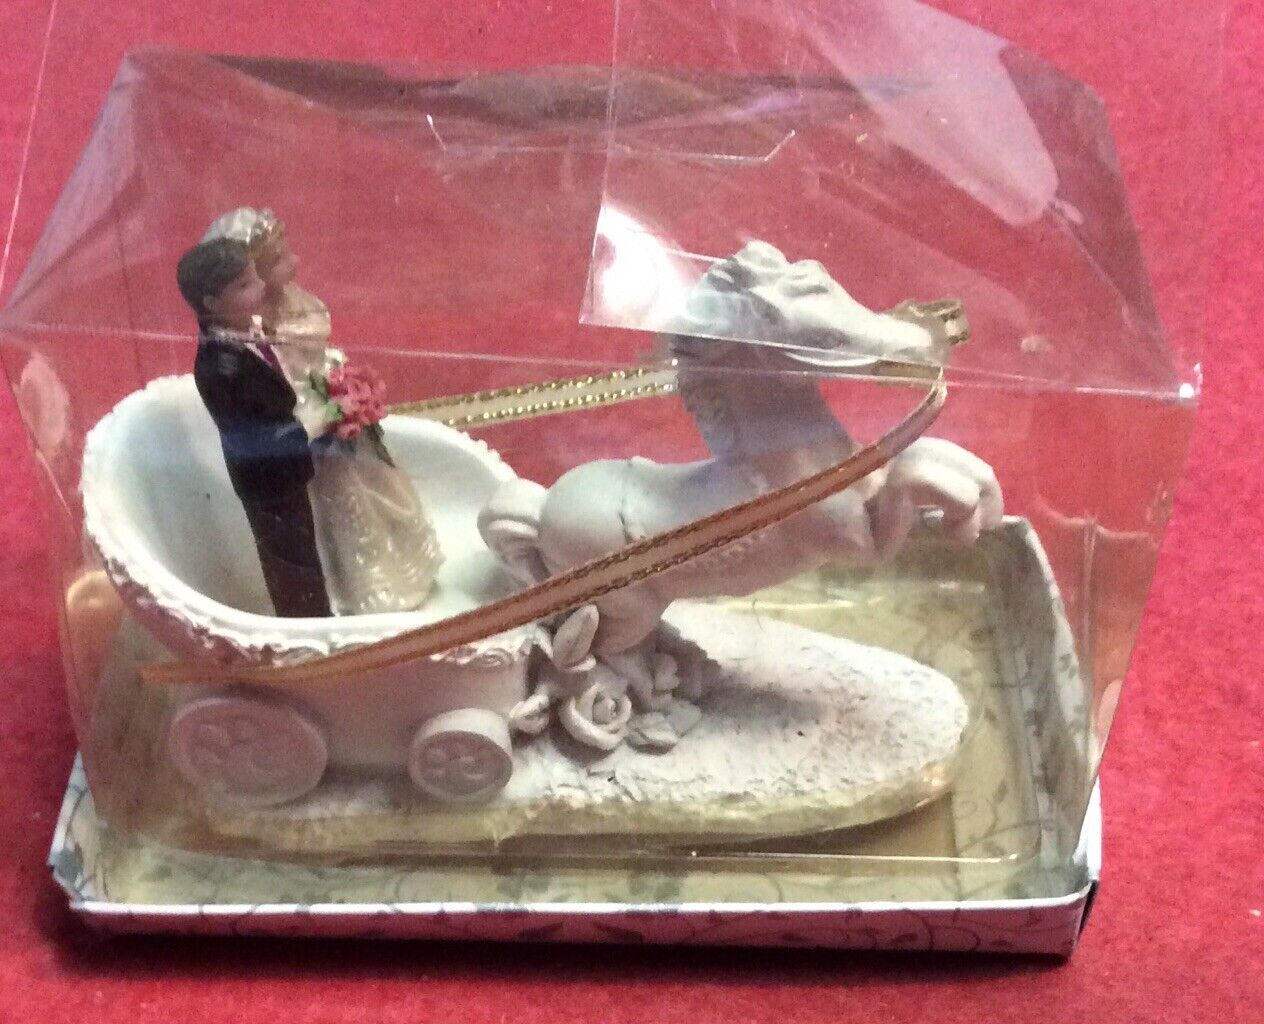 2008 Widding Couple On Horse Carriage Resin Figurine 4”